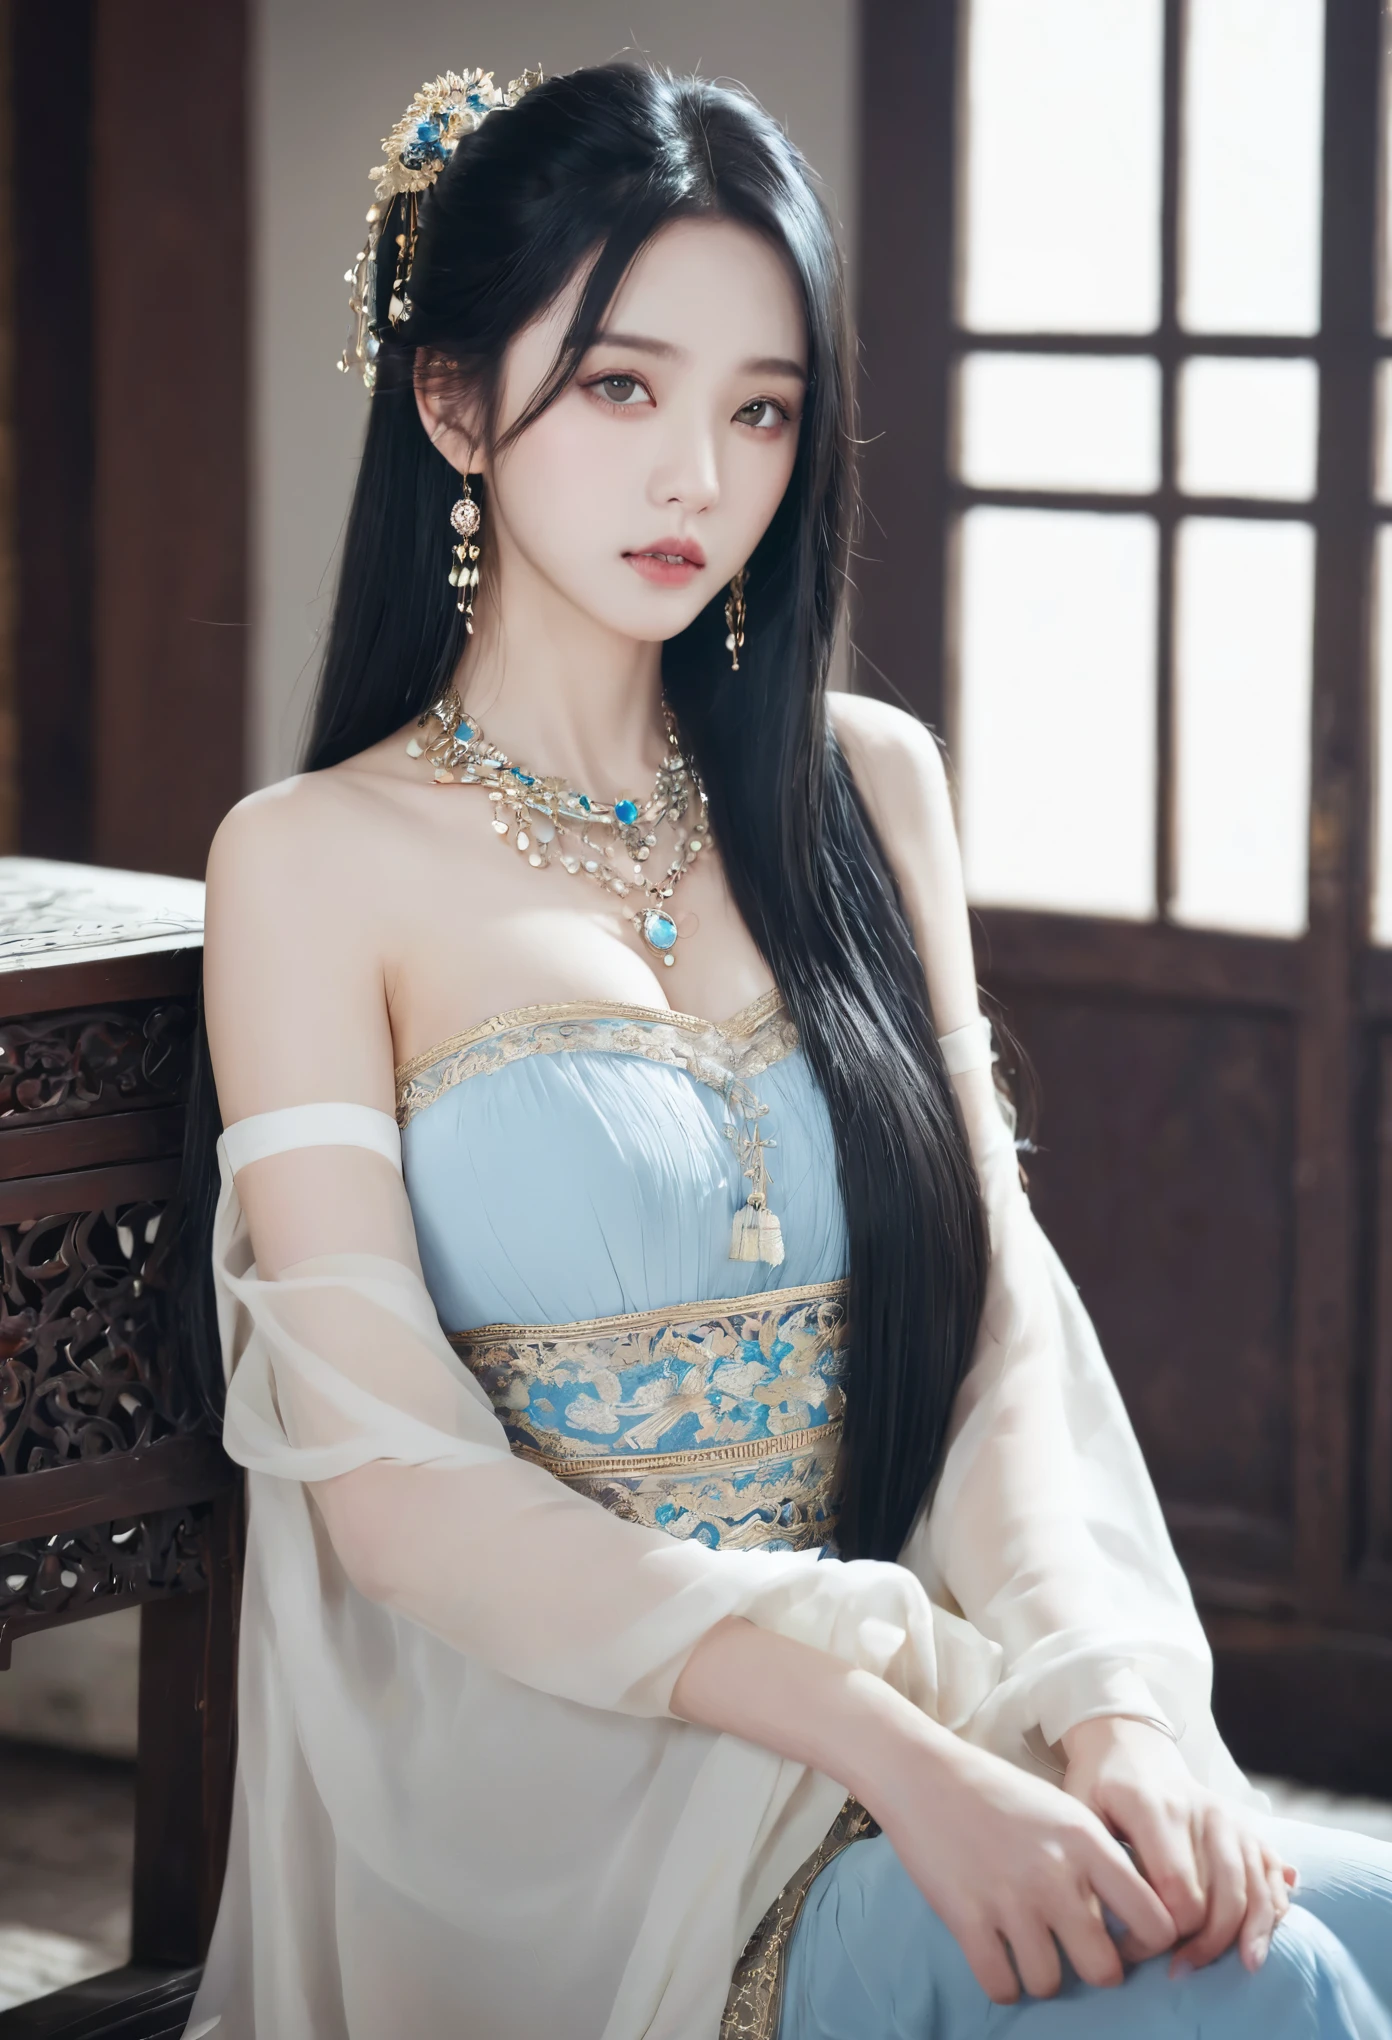 black hair, 1 girl, pretty face, beautiful eyes,long_hair, alone, jewelry, Art, Chinese, rest, 